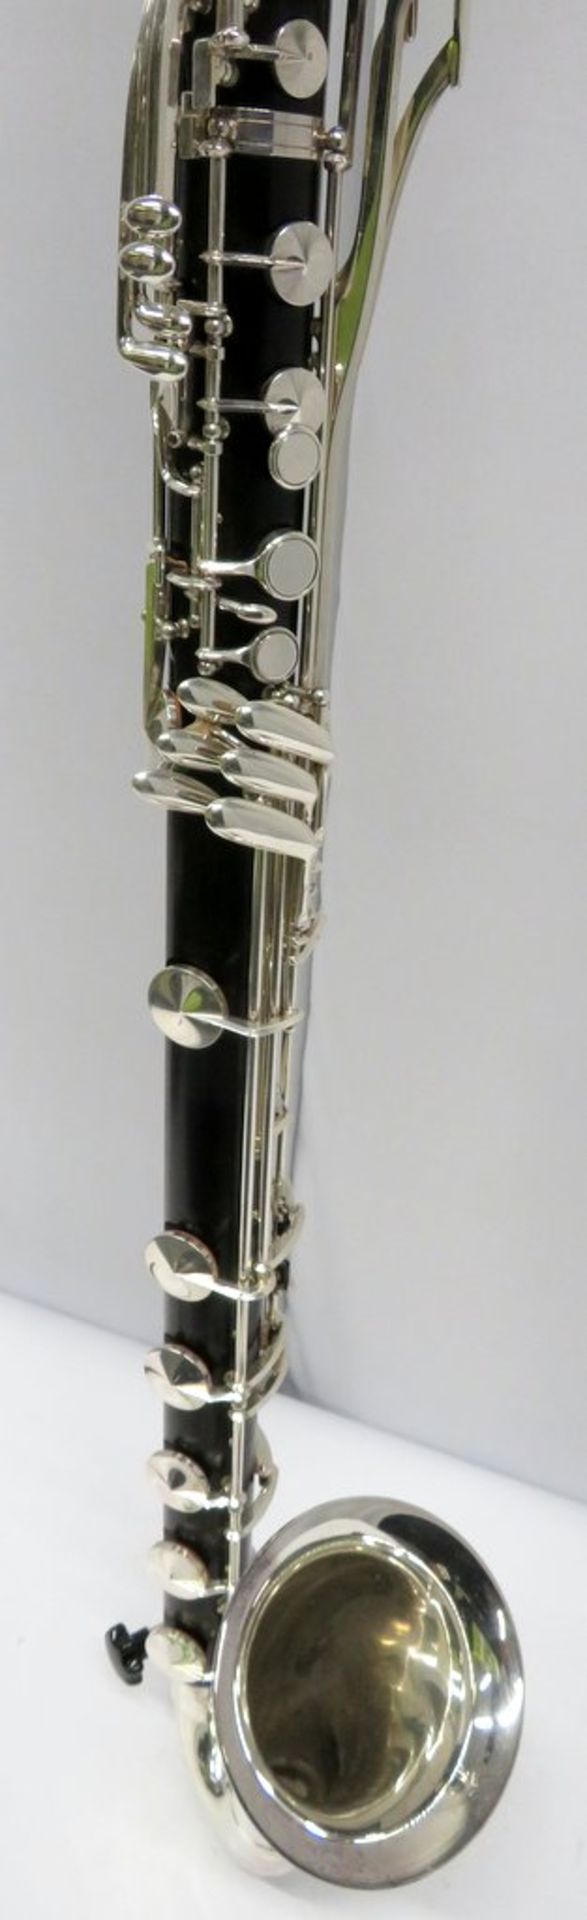 Buffet Crampon Prestige Bass Clarinet Complete With Case. - Image 14 of 20